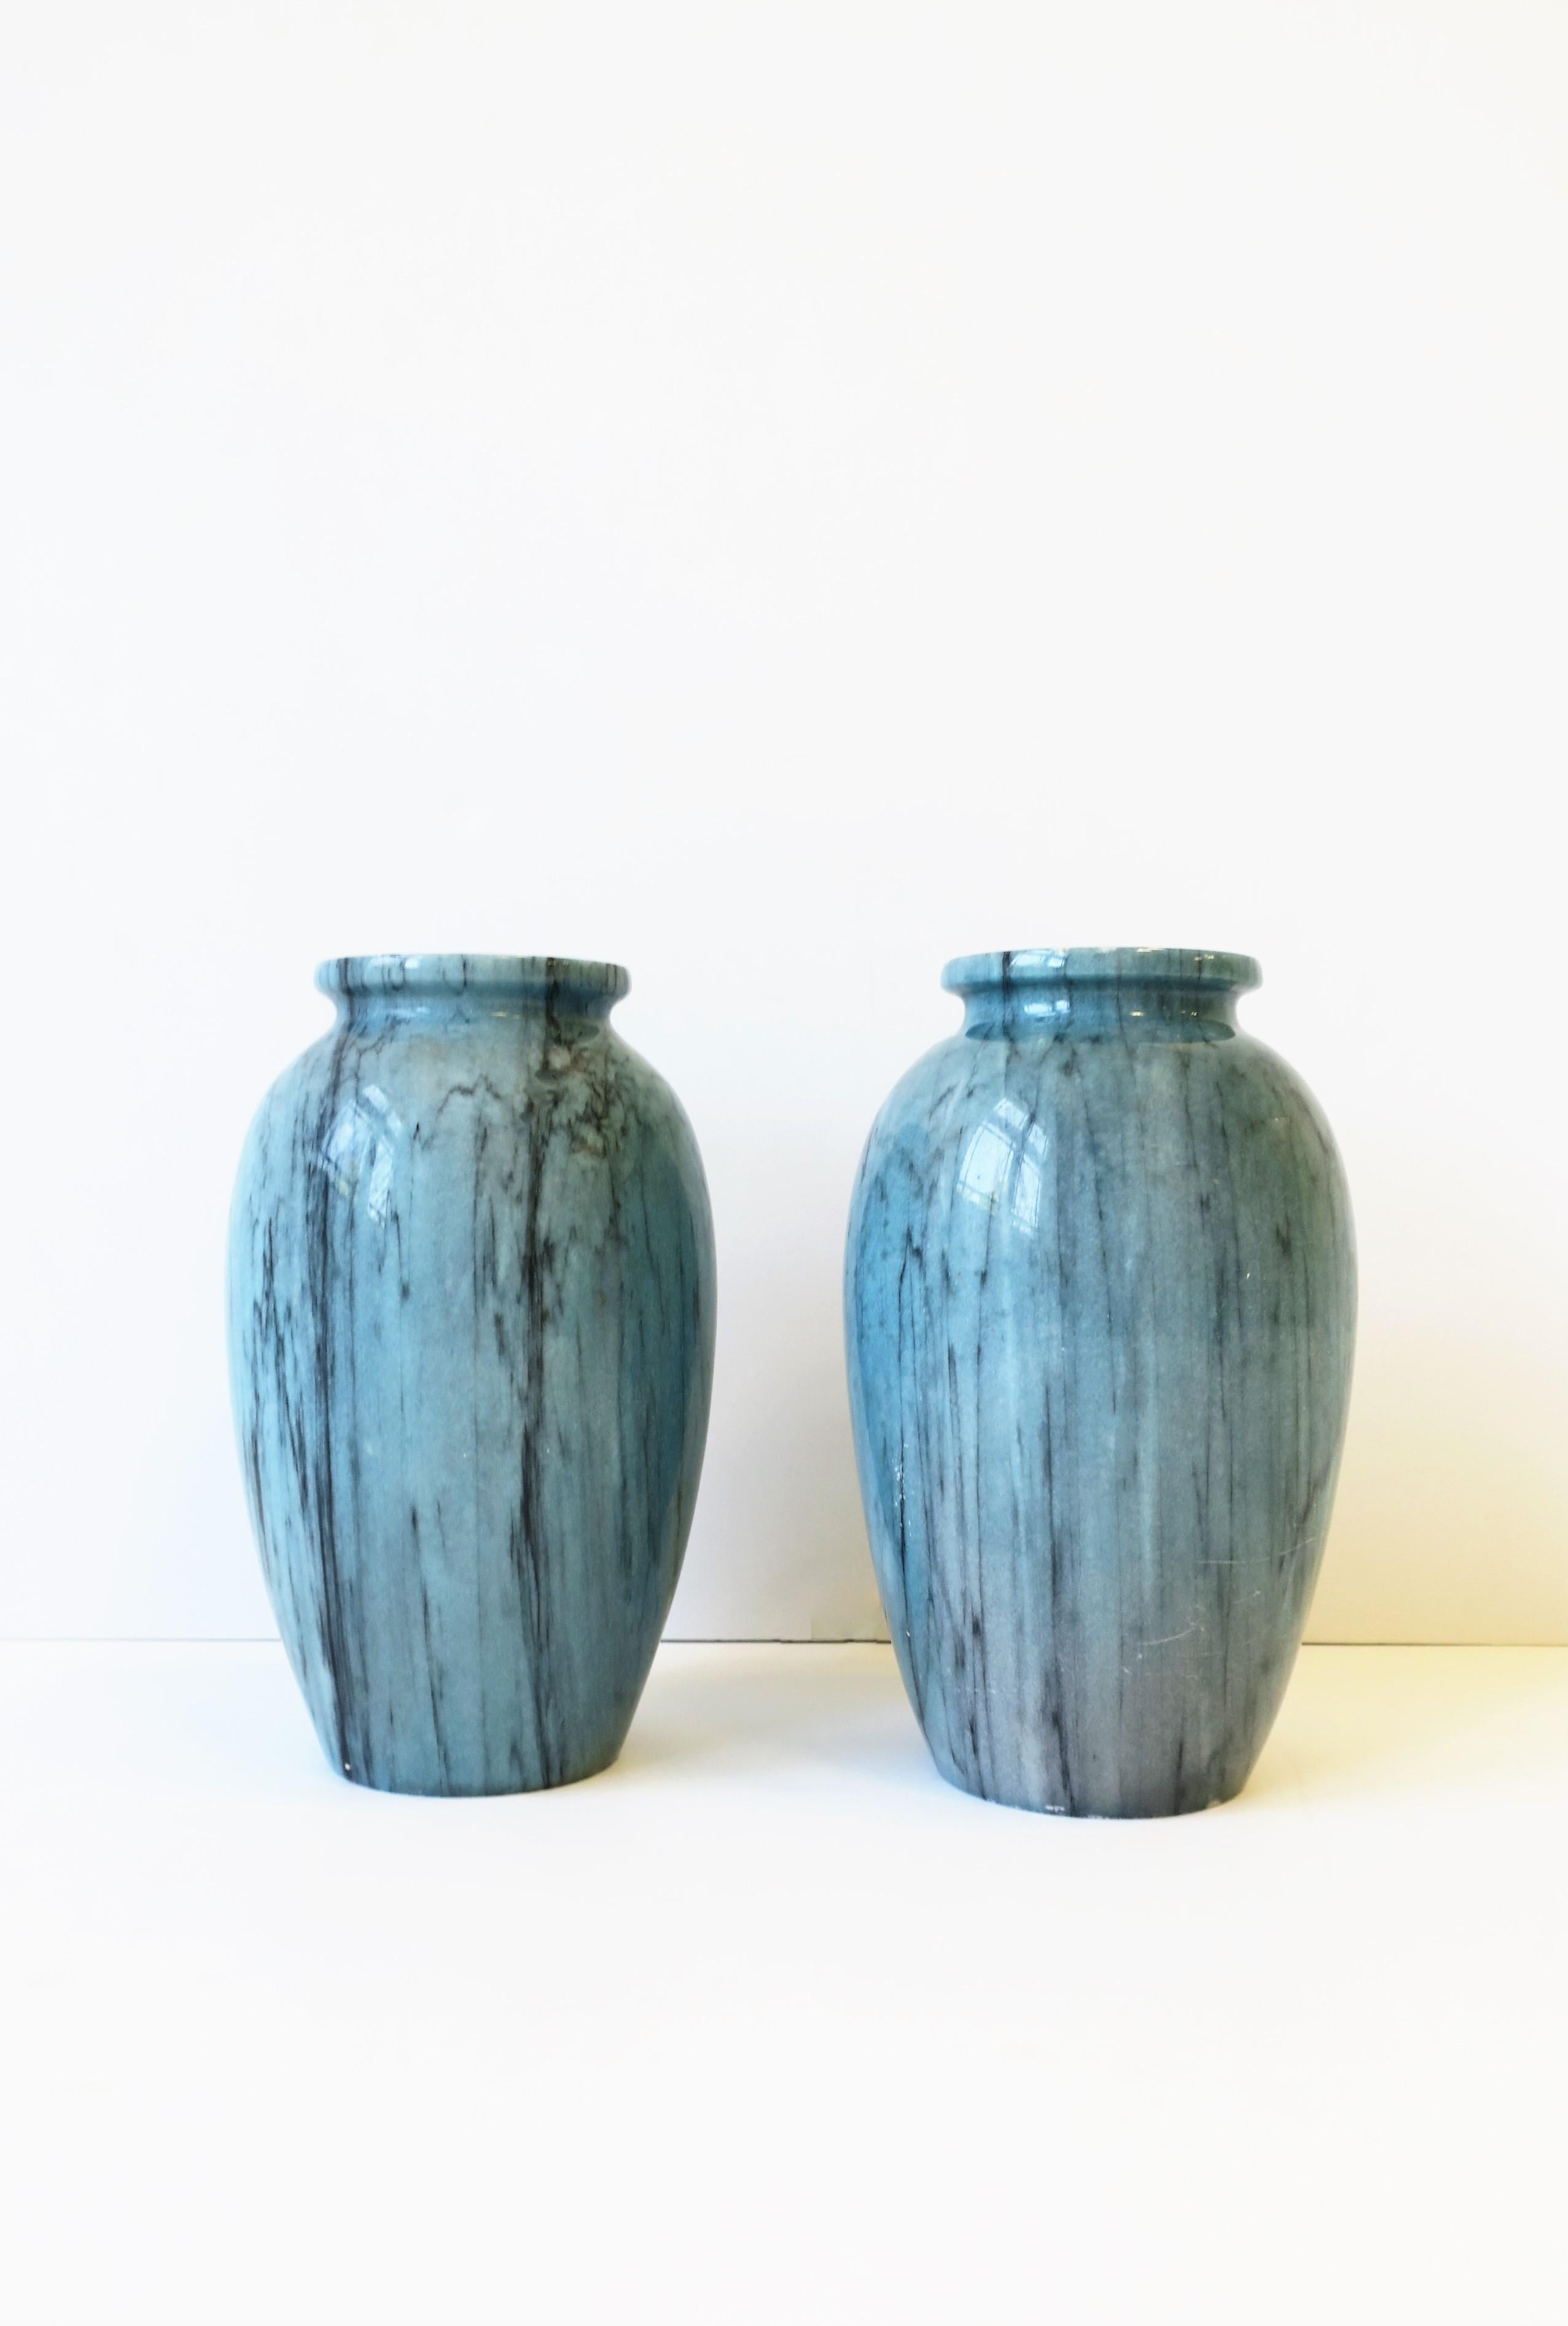 Polished Italian Blue Marble Urns Vases, Pair For Sale